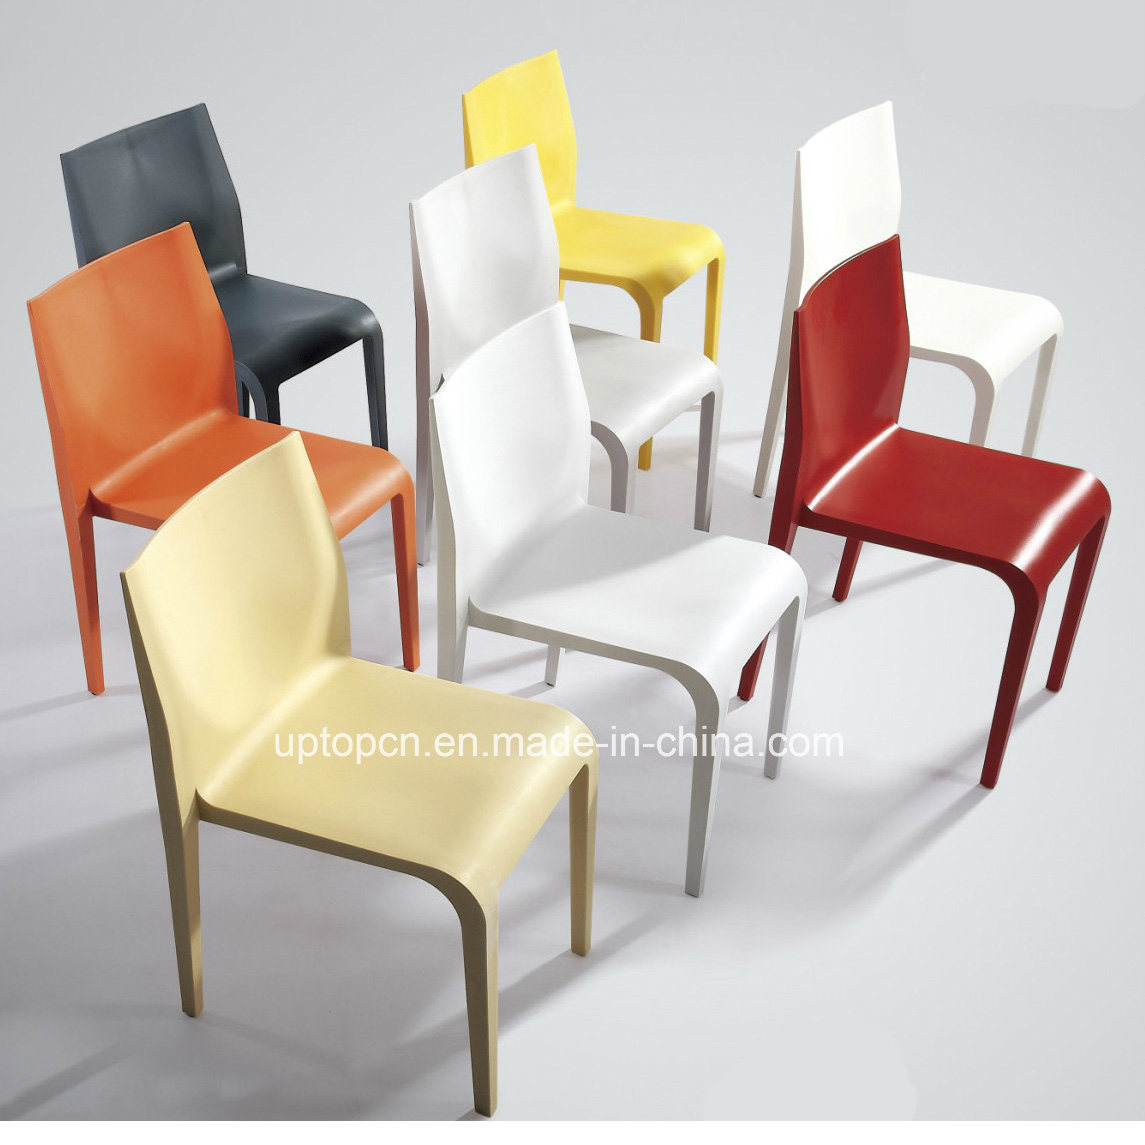 Simple Design Colorful Office Dining Plastic Chair (SP-UC048)